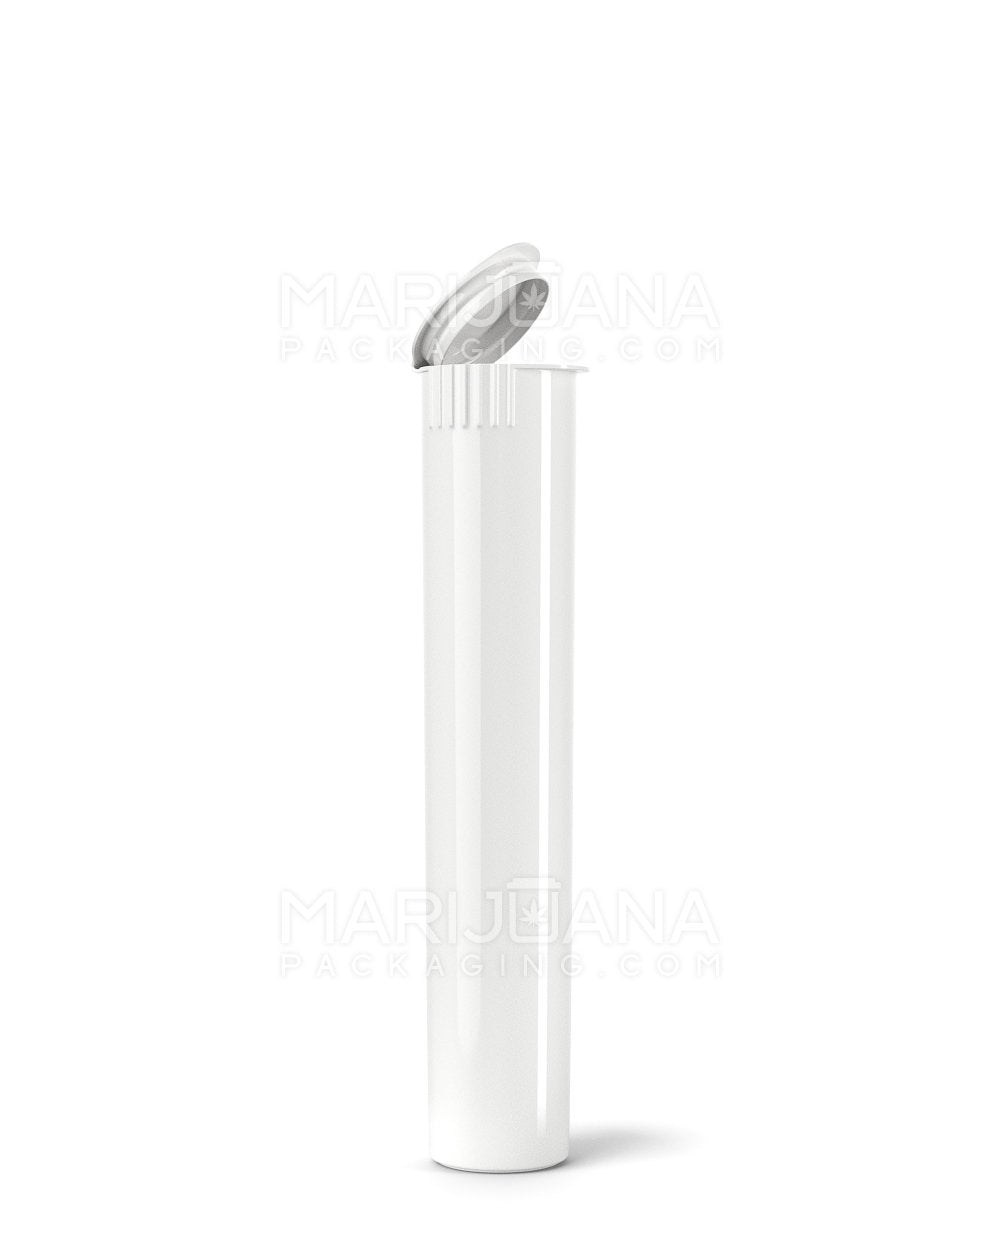 Child Resistant Pop Top Opaque Plastic Pre-Roll Tubes | 95mm - White | Sample - 1